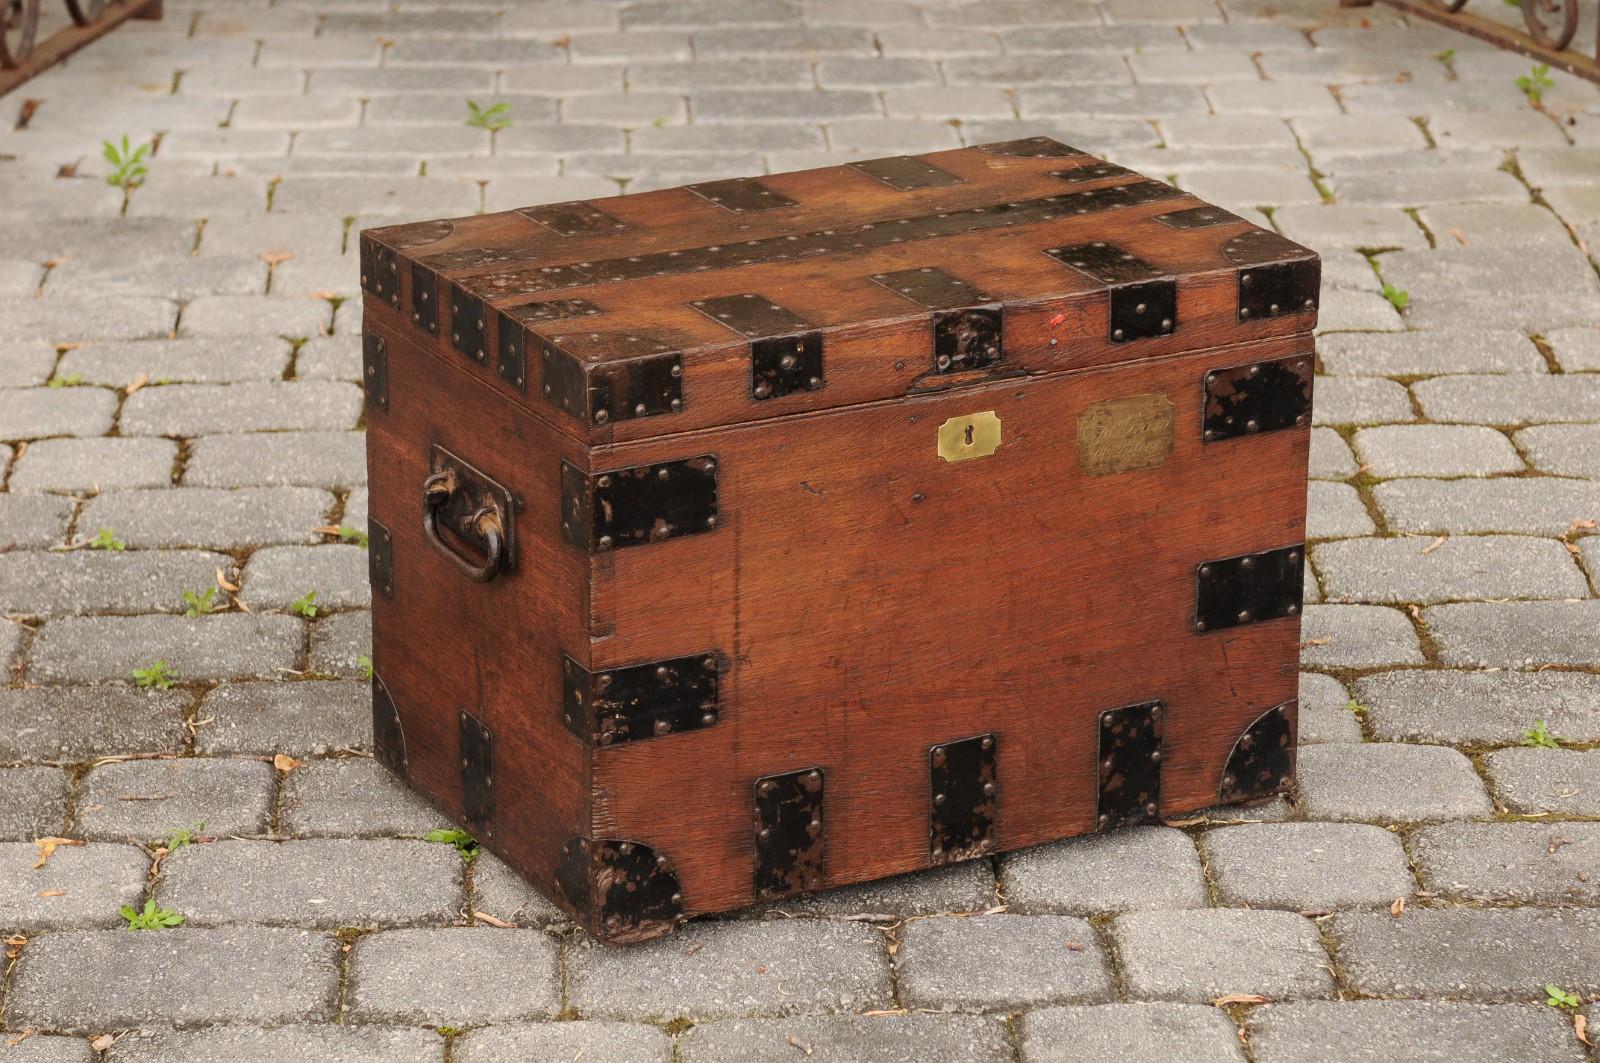 An English oak trunk from the late 19th century, with metal accents and lateral handles. Born in England during the last decade of the 19th century, this handsome oak trunk features a linear Silhouette, regularly accented with metal braces. The lid